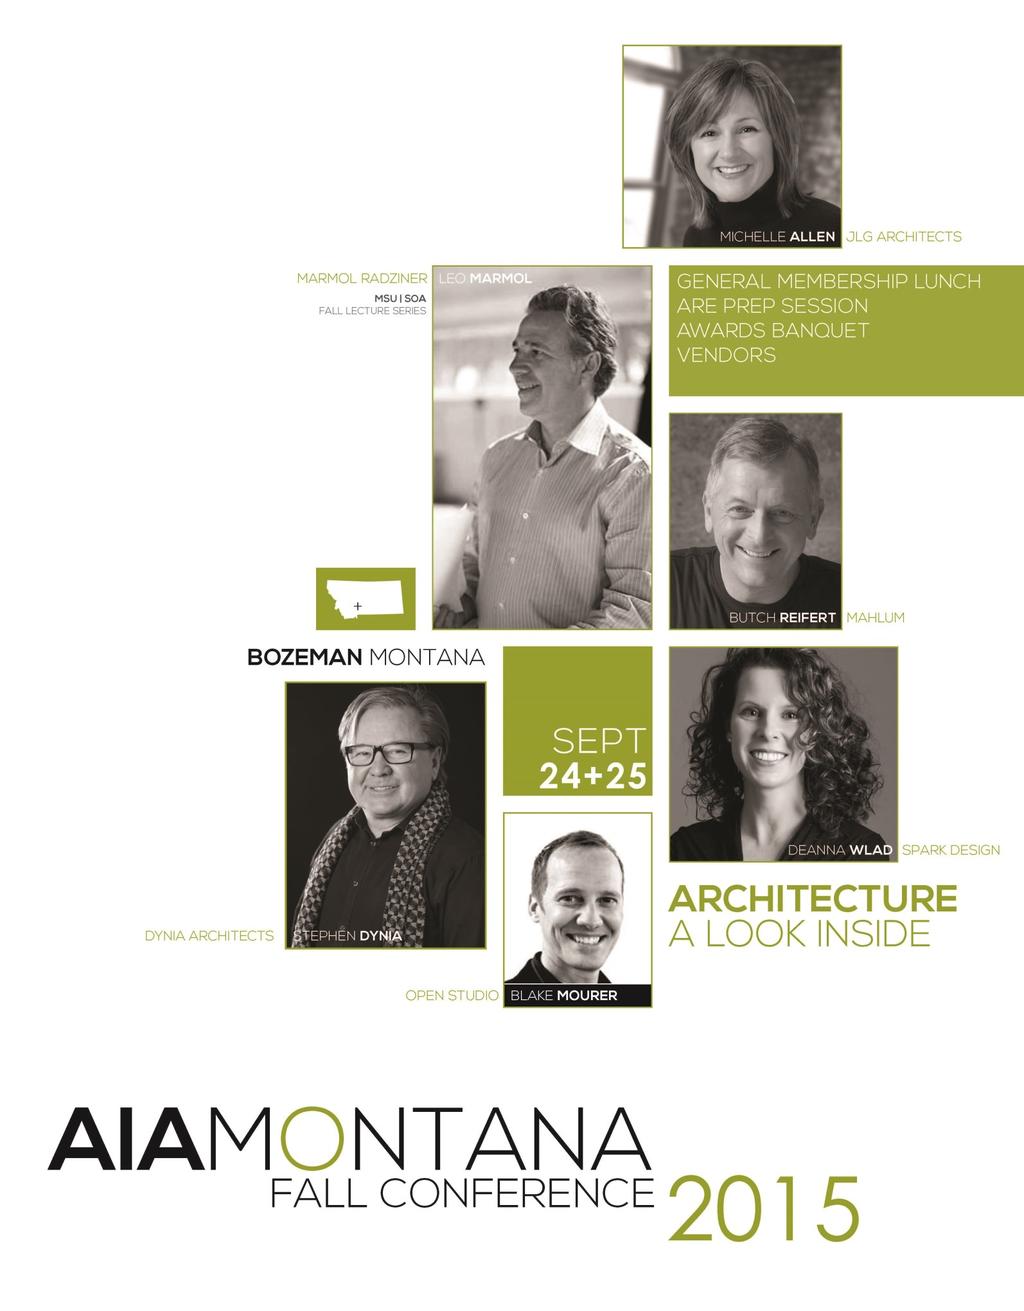 Volume 18, Issue 3 Page 4 Annual Fall Conference: Architecture a LOOK INSIDE September 24-25 GranTree Bozeman, Montana To register, visit h t t p : / / a i a - m t.